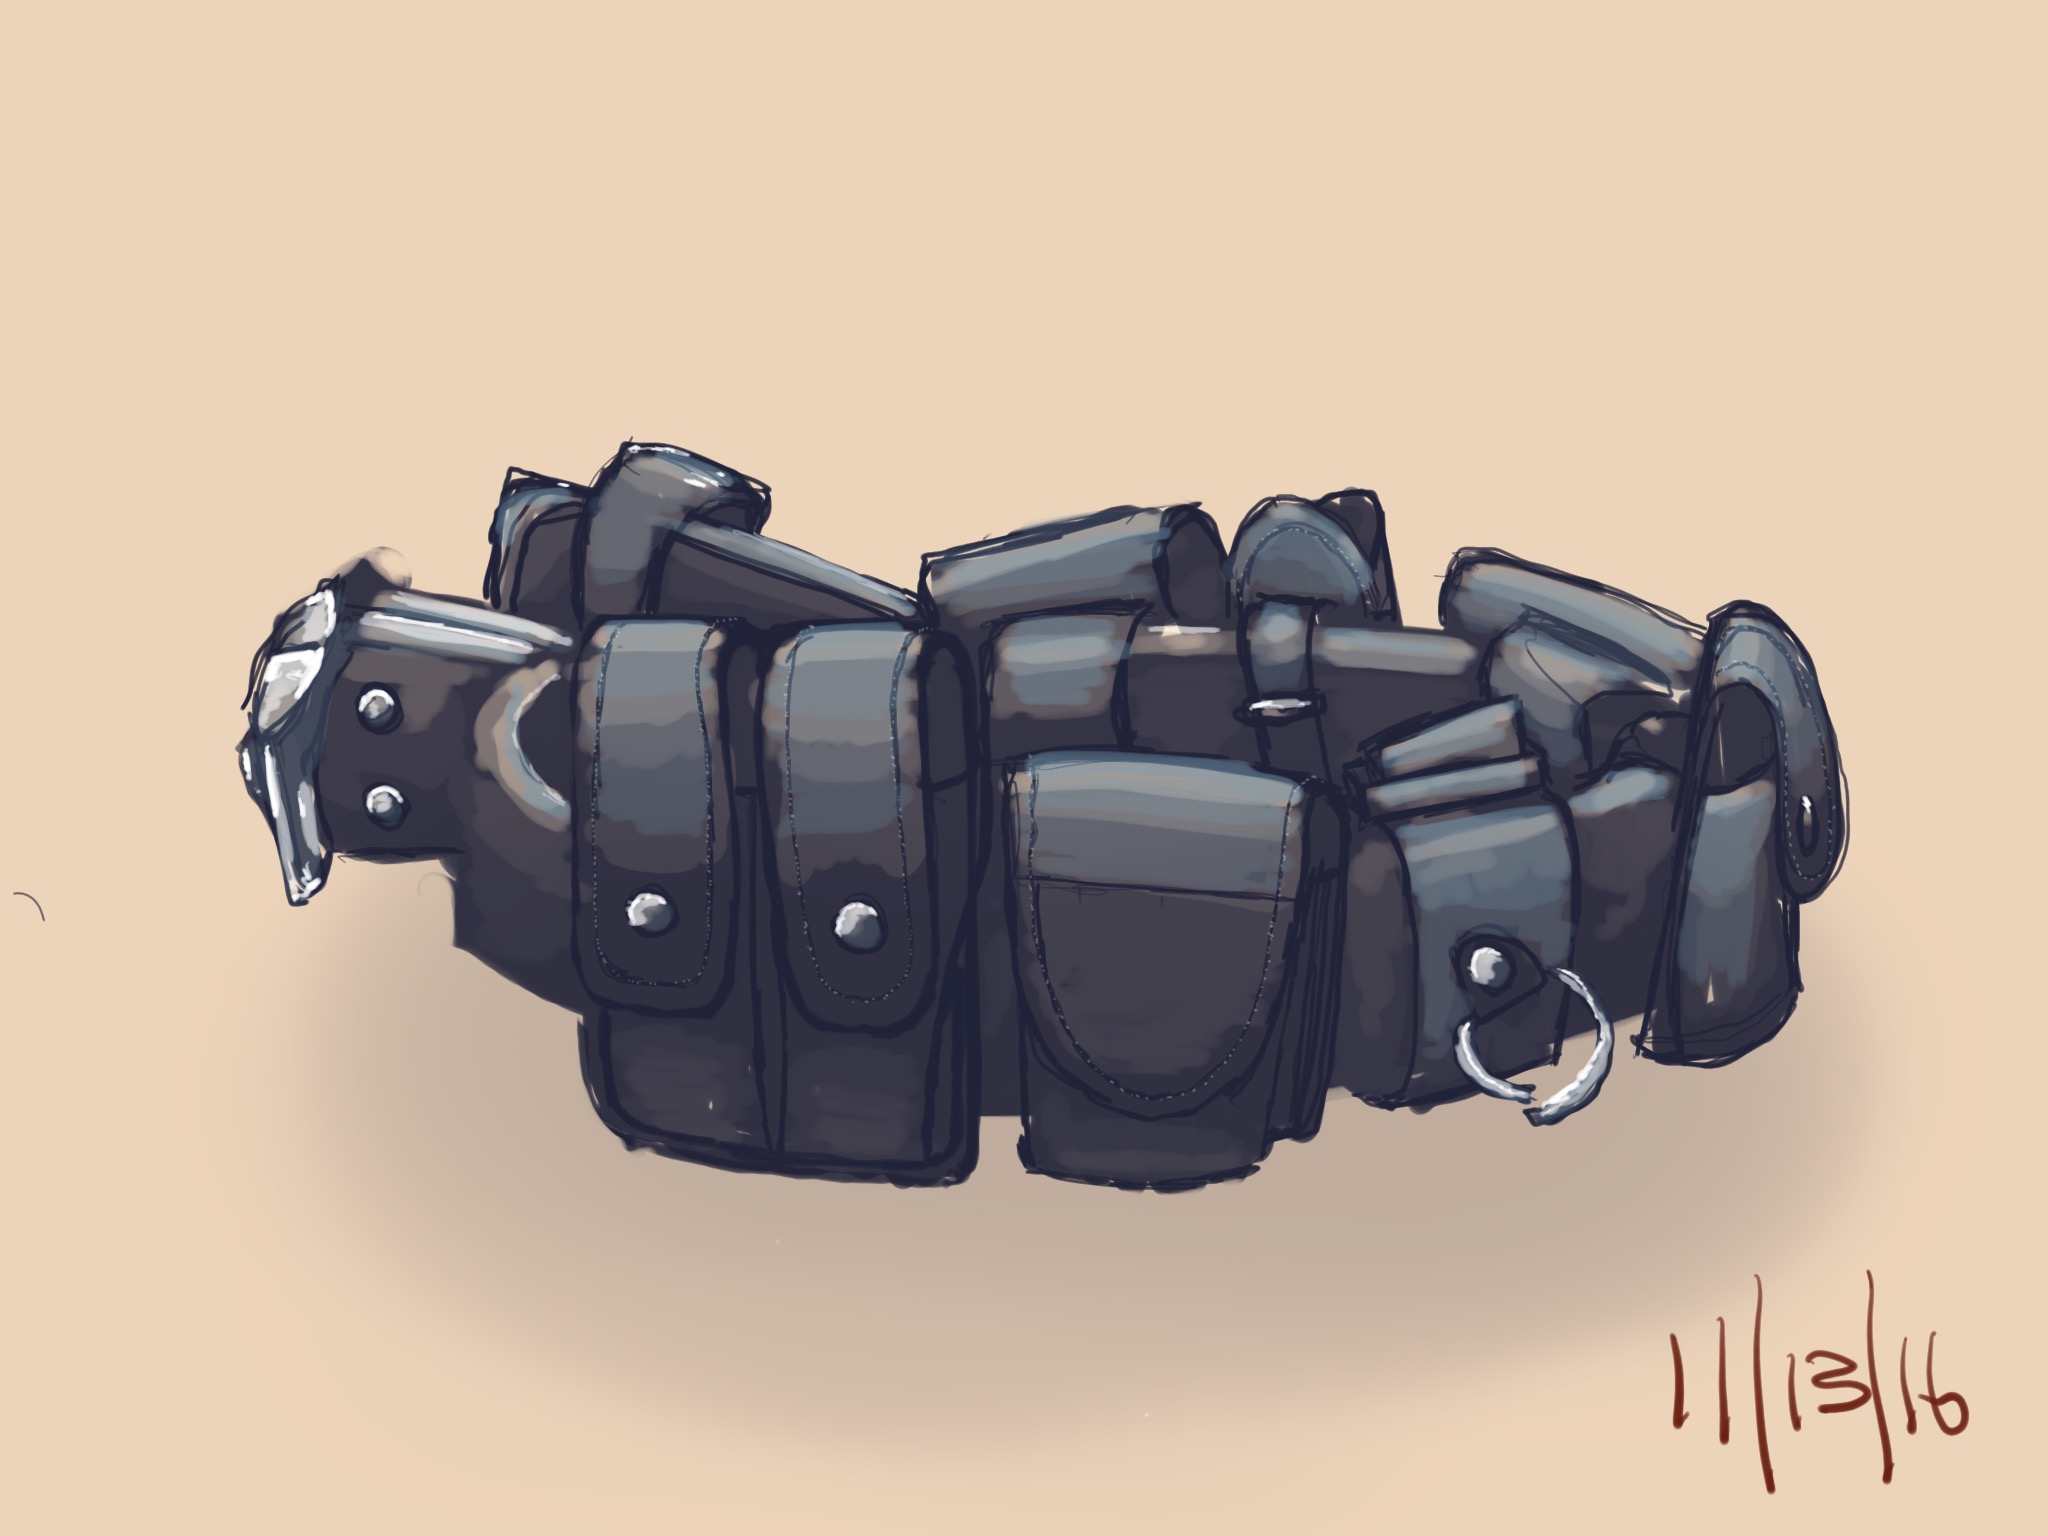 #gdpipeline daily challenge 11-13-16 "utility belt"